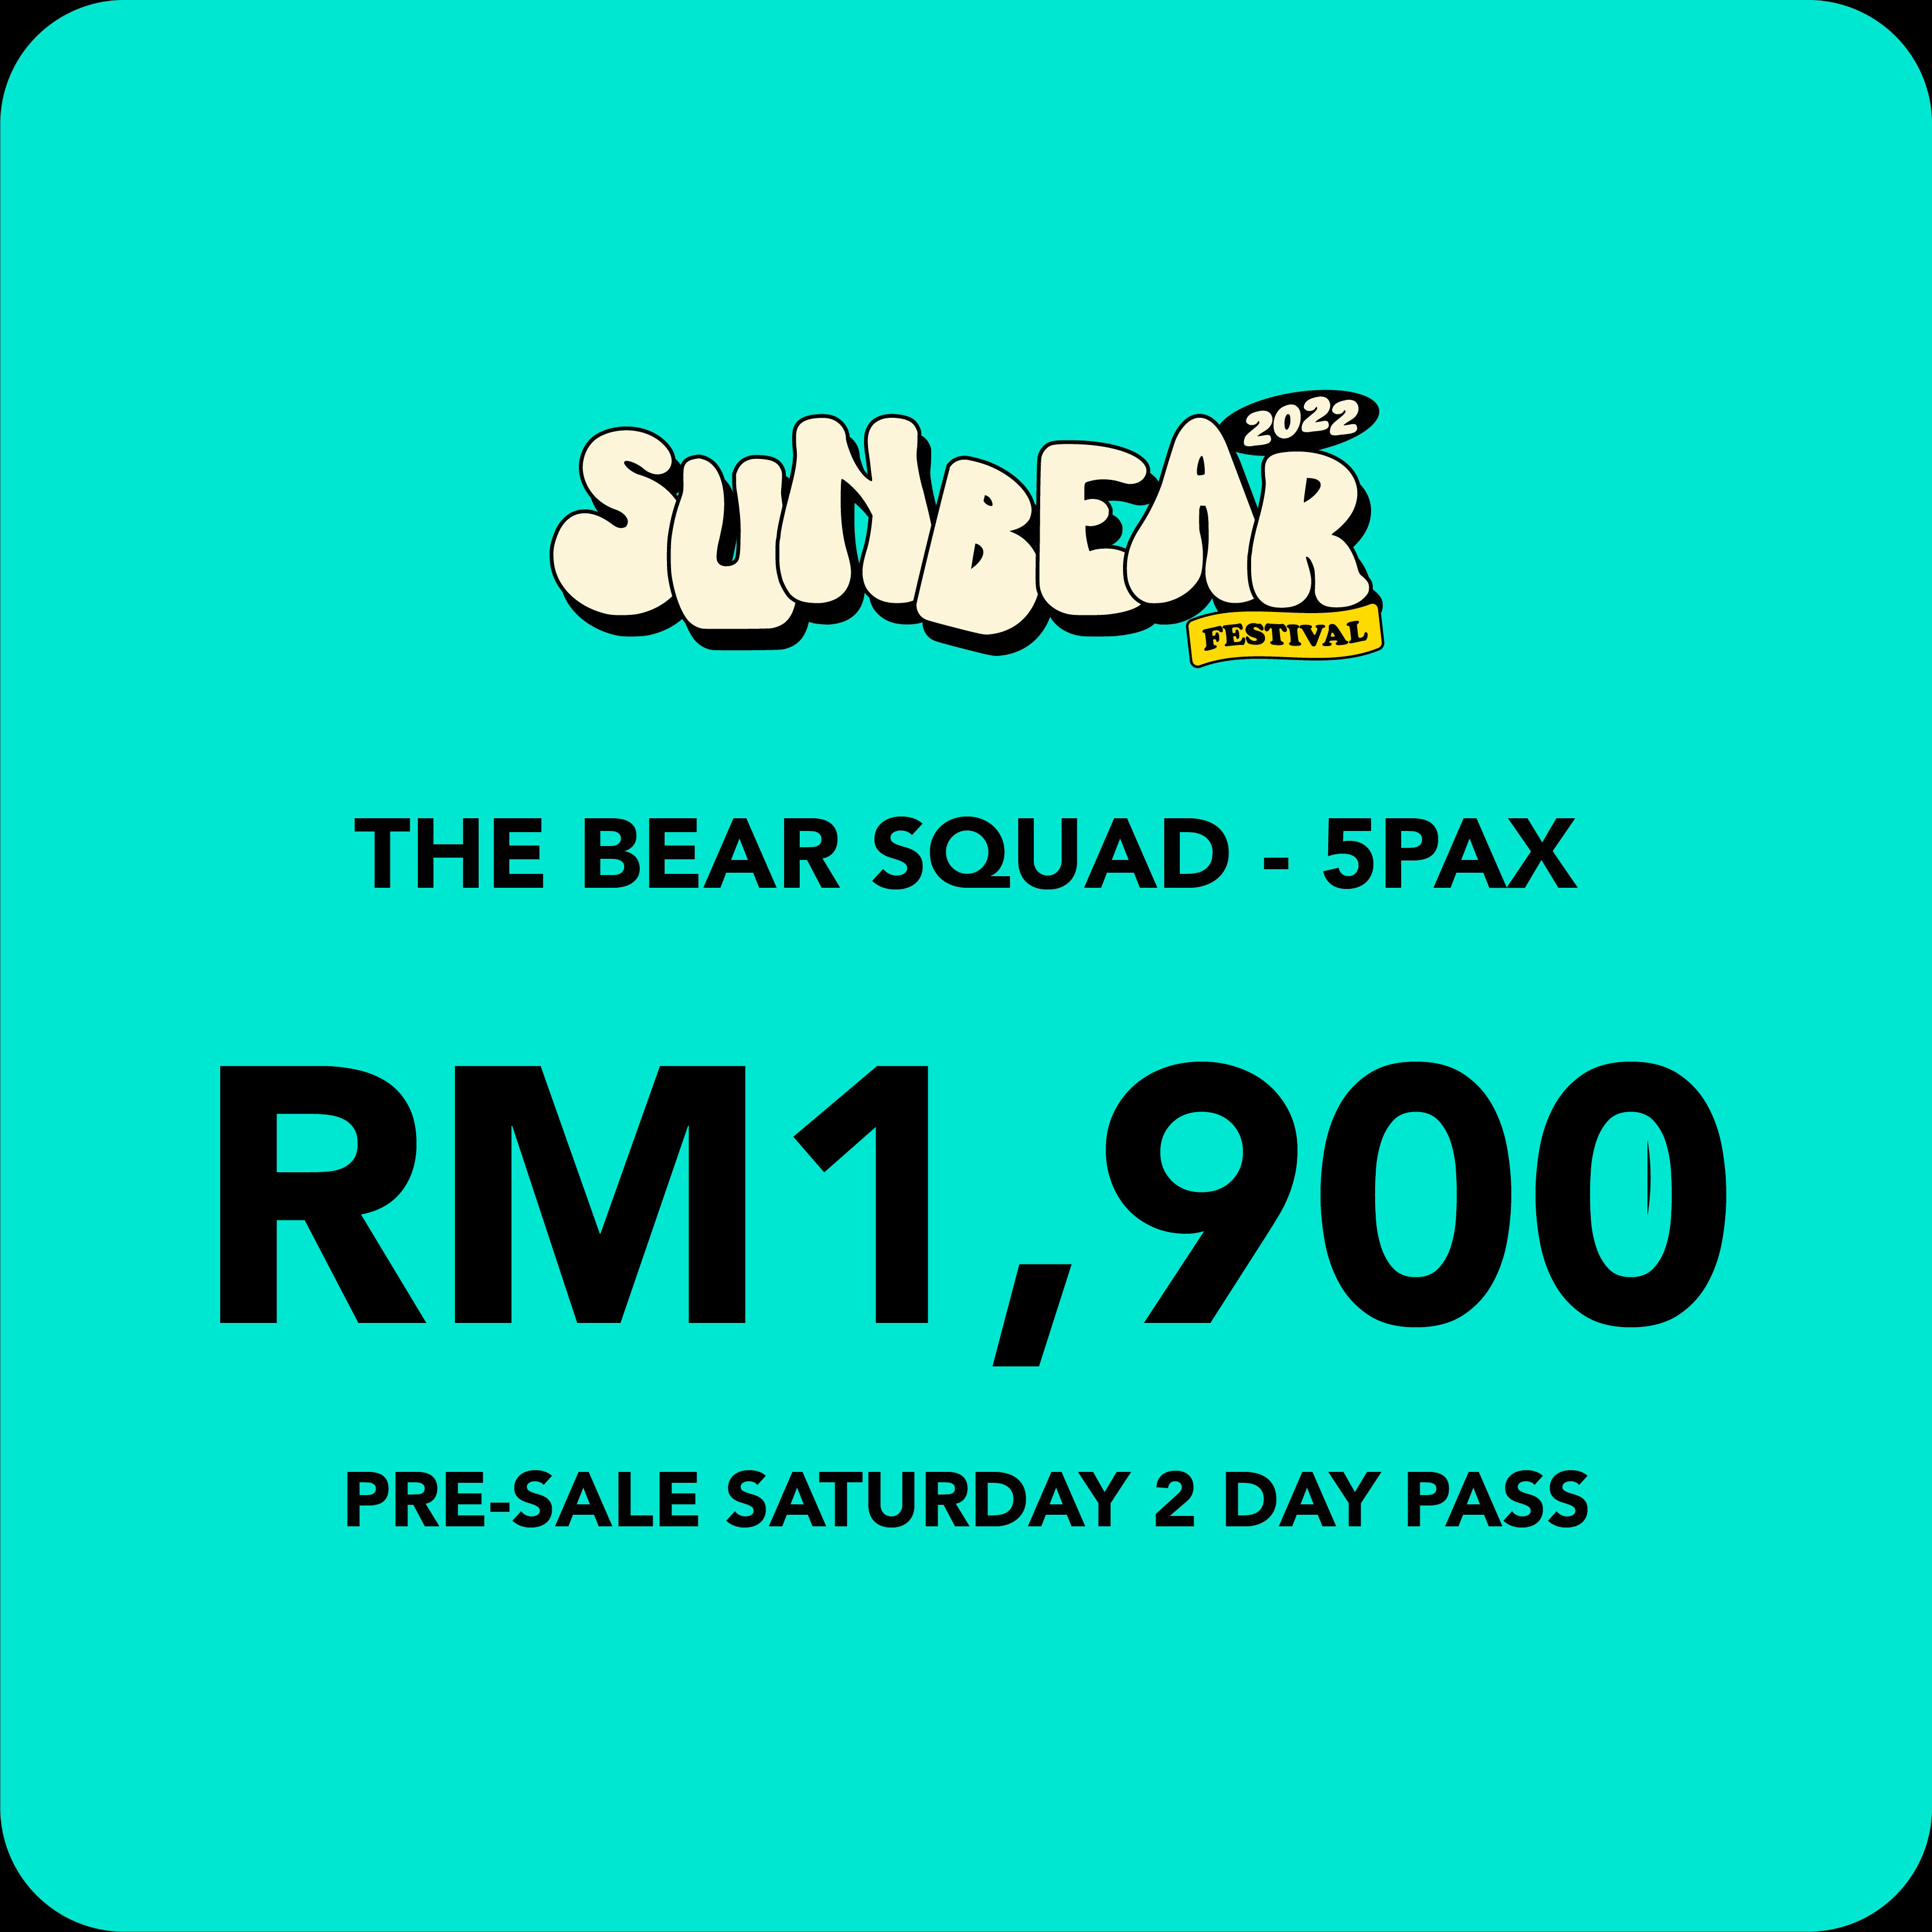 THE BEAR SQUAD PRE-SALE 2 DAY PASS - 5 PAX